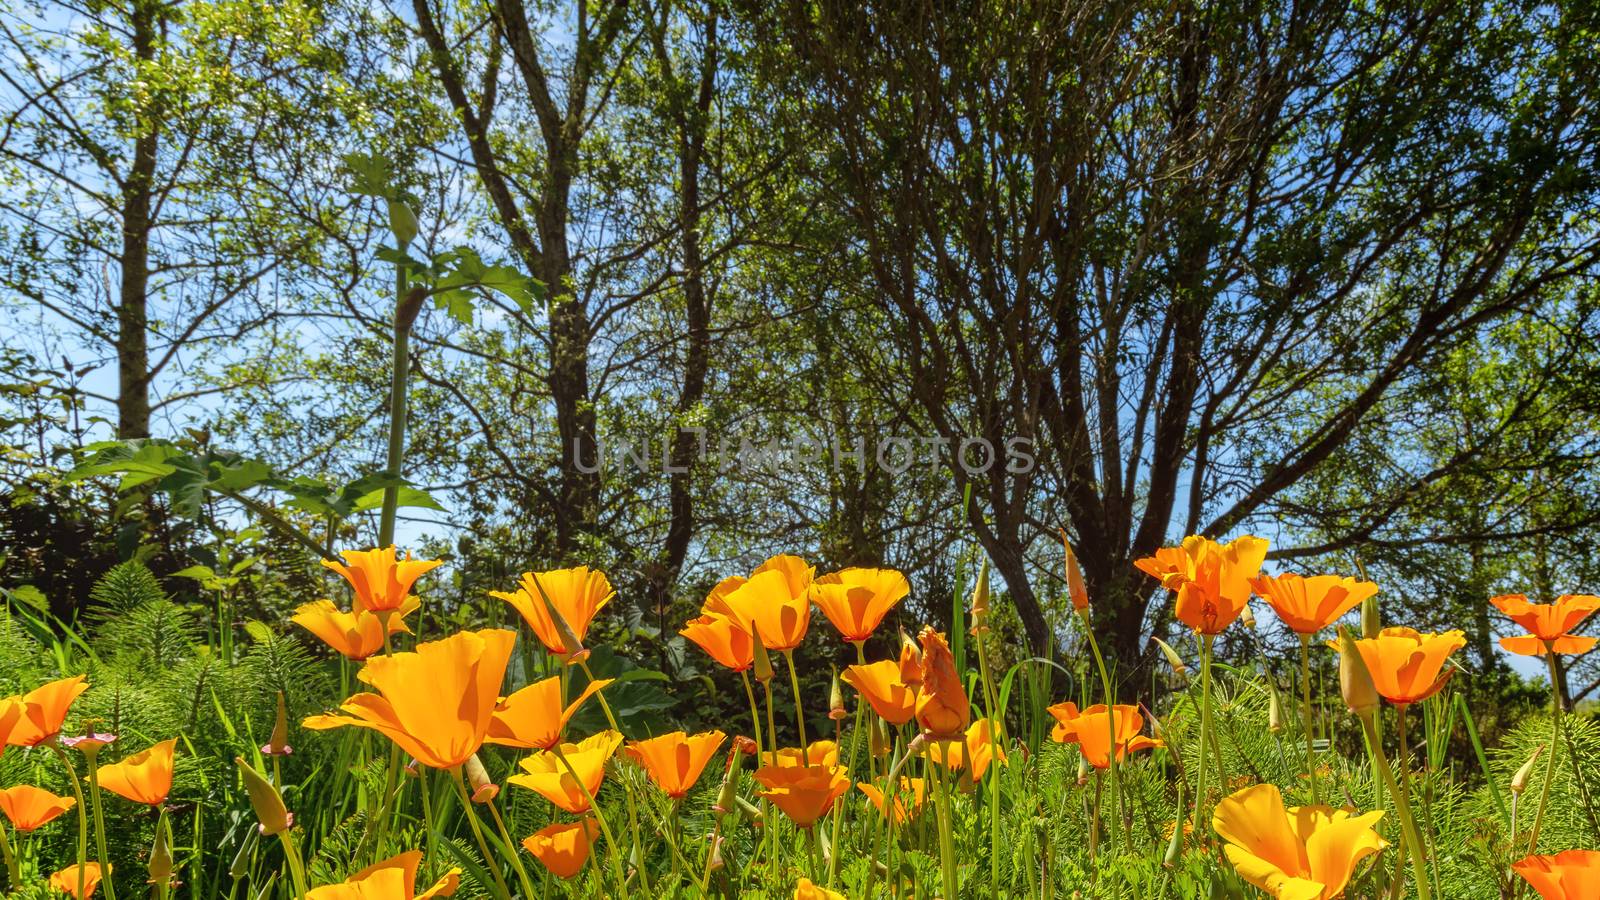 California Poppies on a Sunny Day by backyard_photography